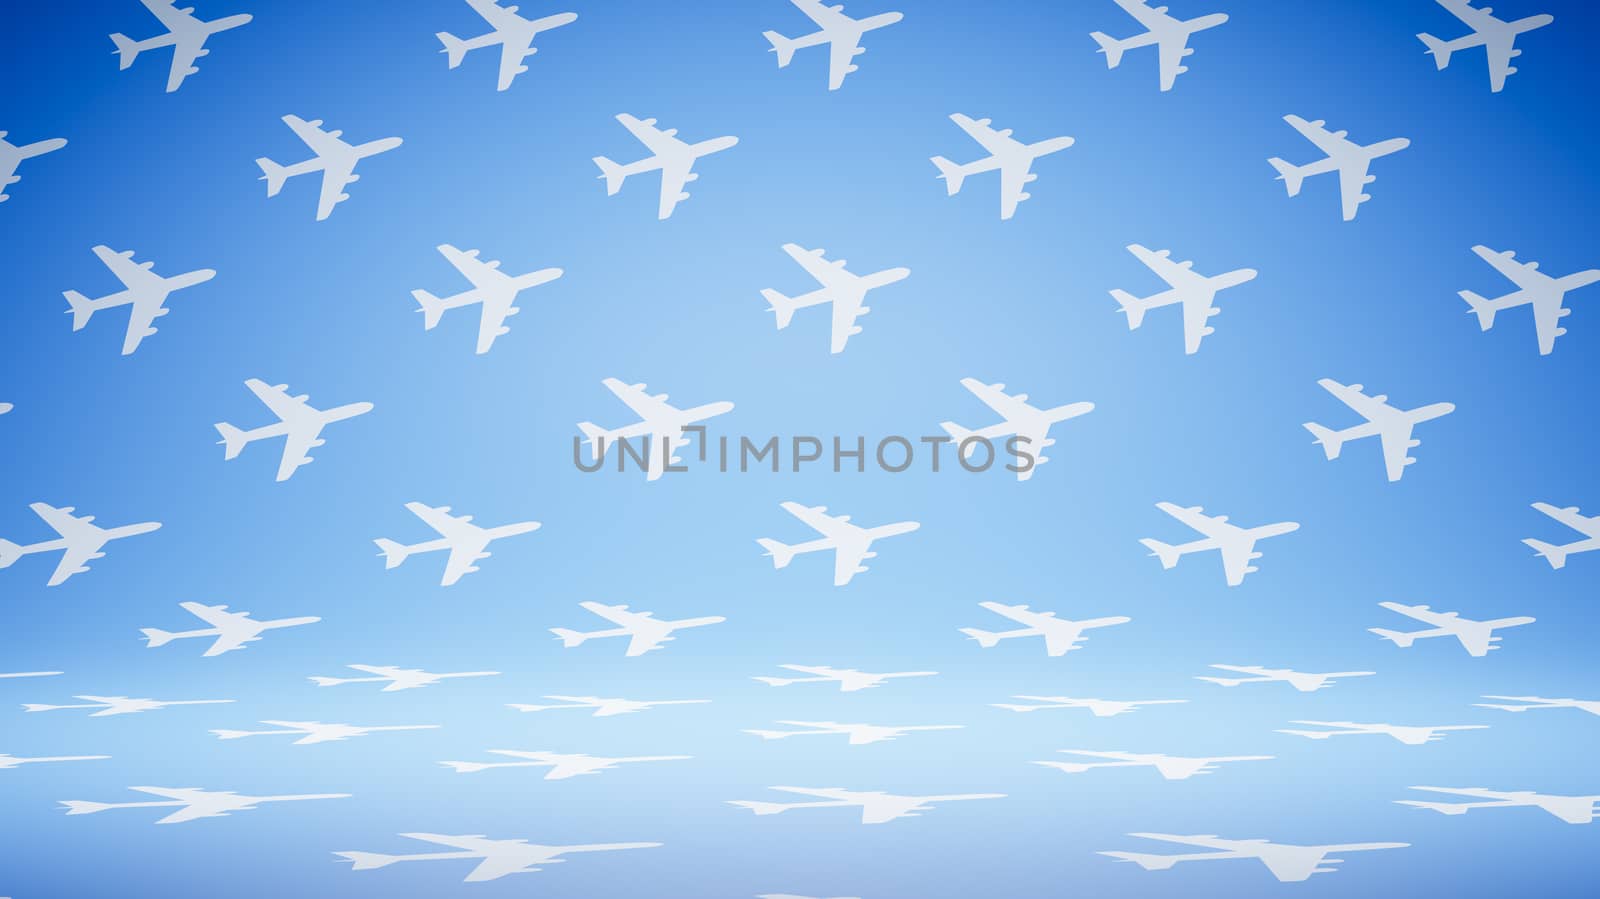 Empty Blank Blue and White Airplane Shape Pattern Studio Background 3D Render Illustration